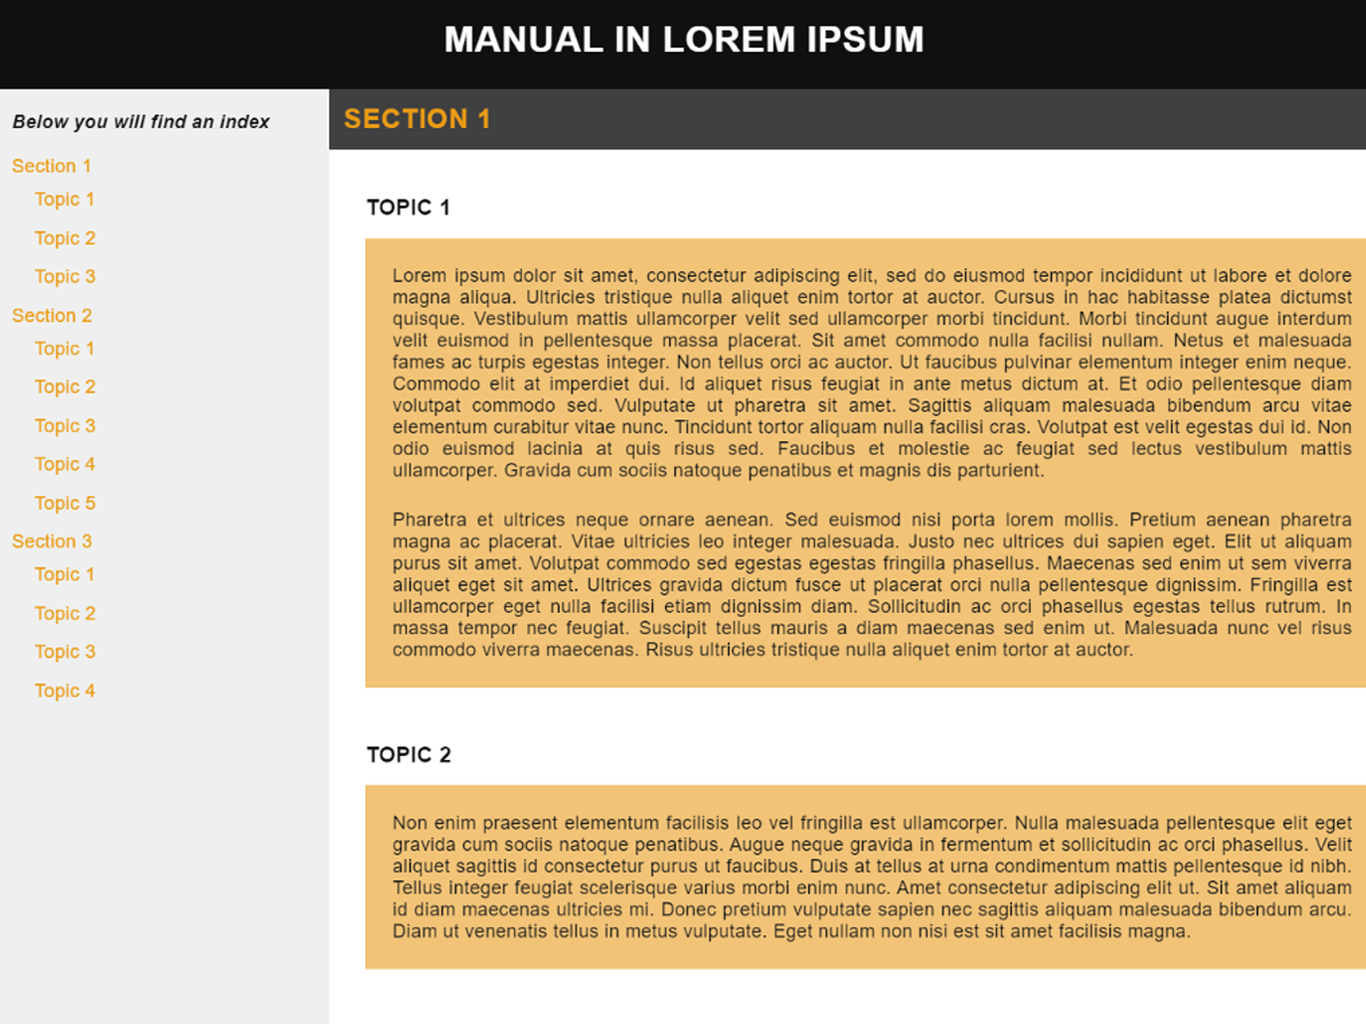 A webpage display of an online manual written in the placeholder text of Lorem Ipsum